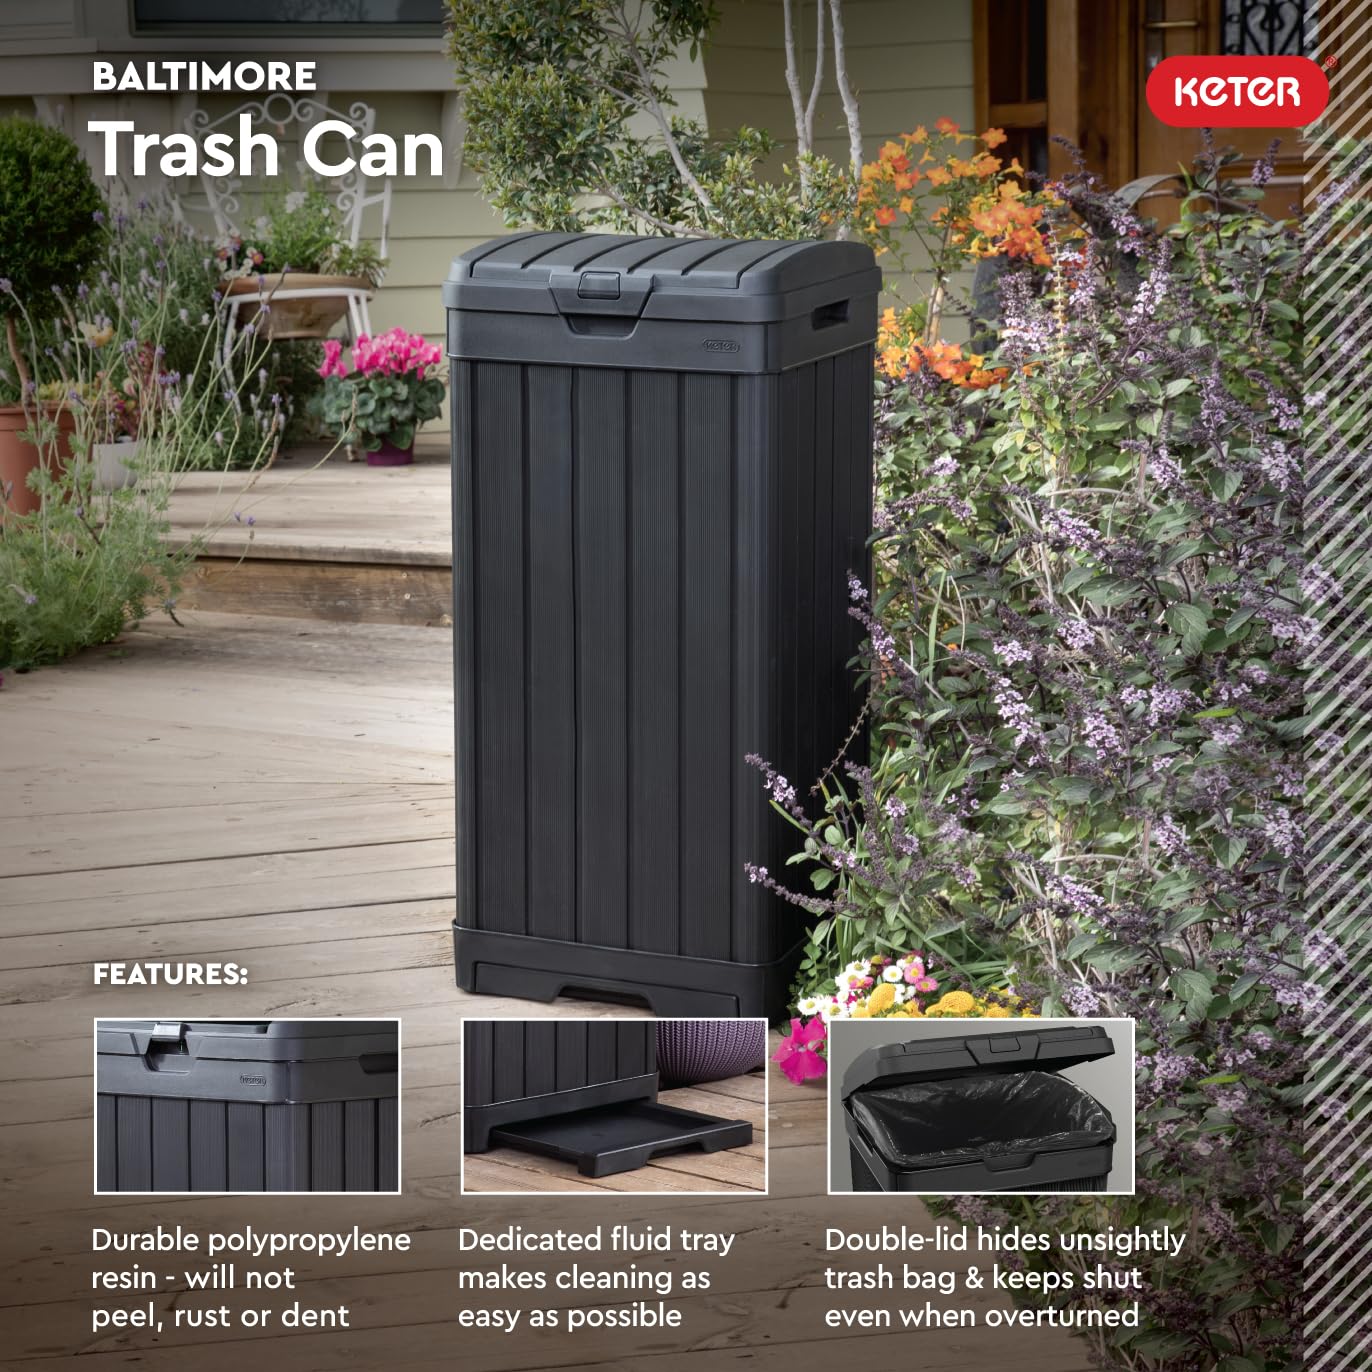 https://bigbigmart.com/wp-content/uploads/2023/11/Keter-Baltimore-38-Gallon-Trash-Can-with-Lid-and-Drip-Tray-for-Easy-Cleaning-Perfect-for-Patios-Kitchens-and-Outdoor-Entertaining-38-Gallons-Black1.jpg